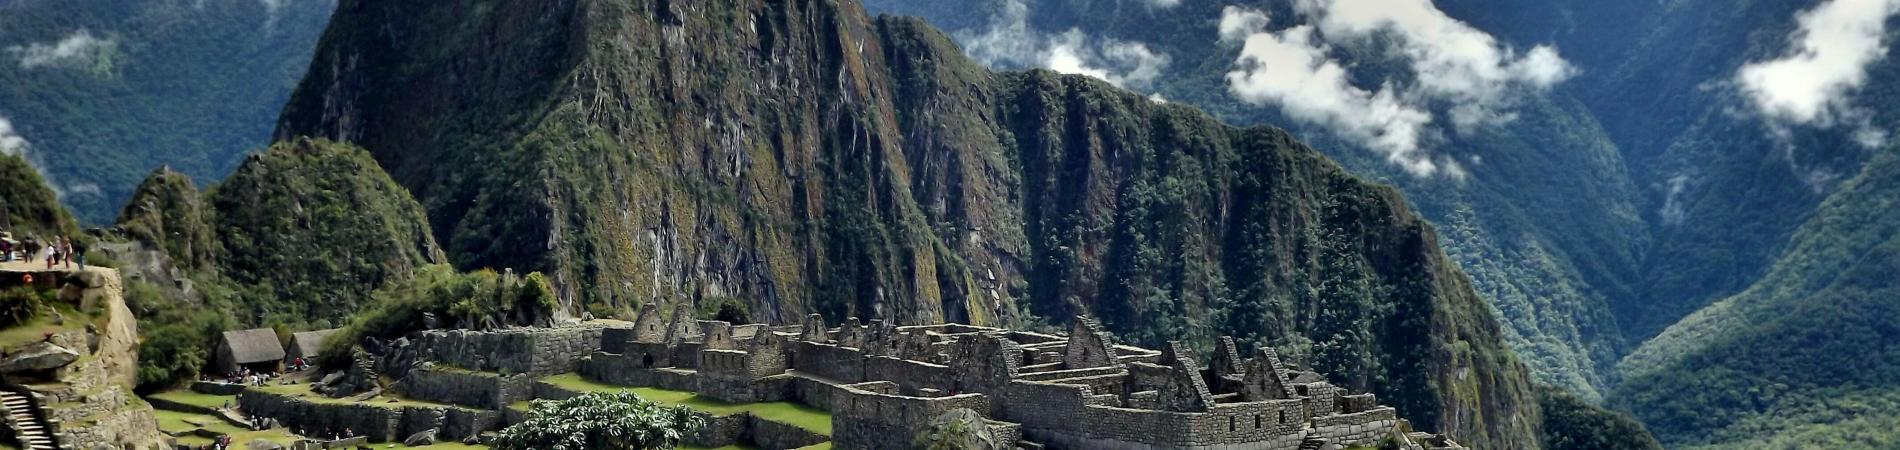 Image for Tips for a trip to Machu Picchu